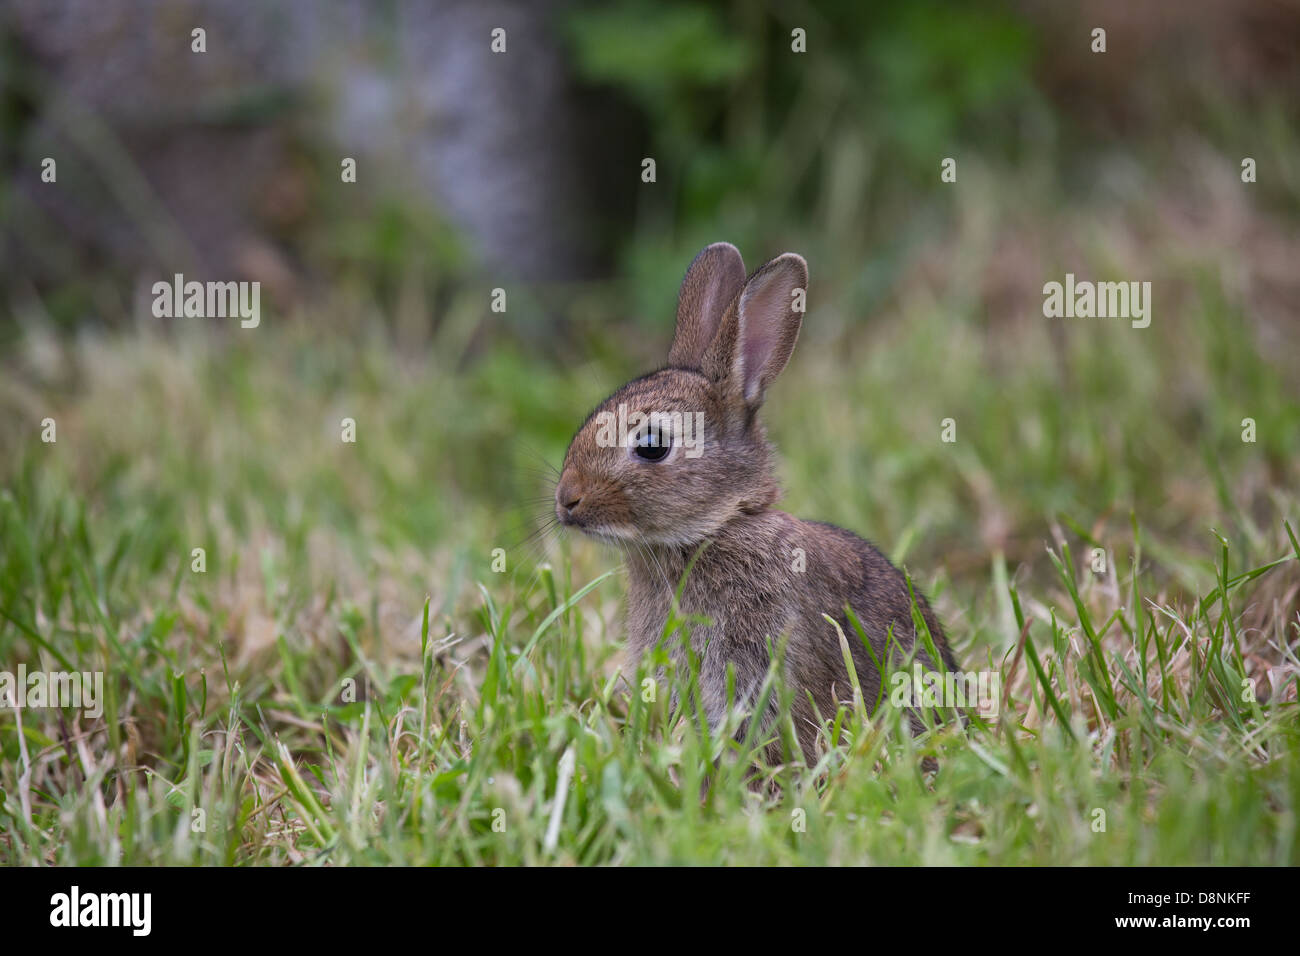 A wild young rabbit in a field of grass Stock Photo